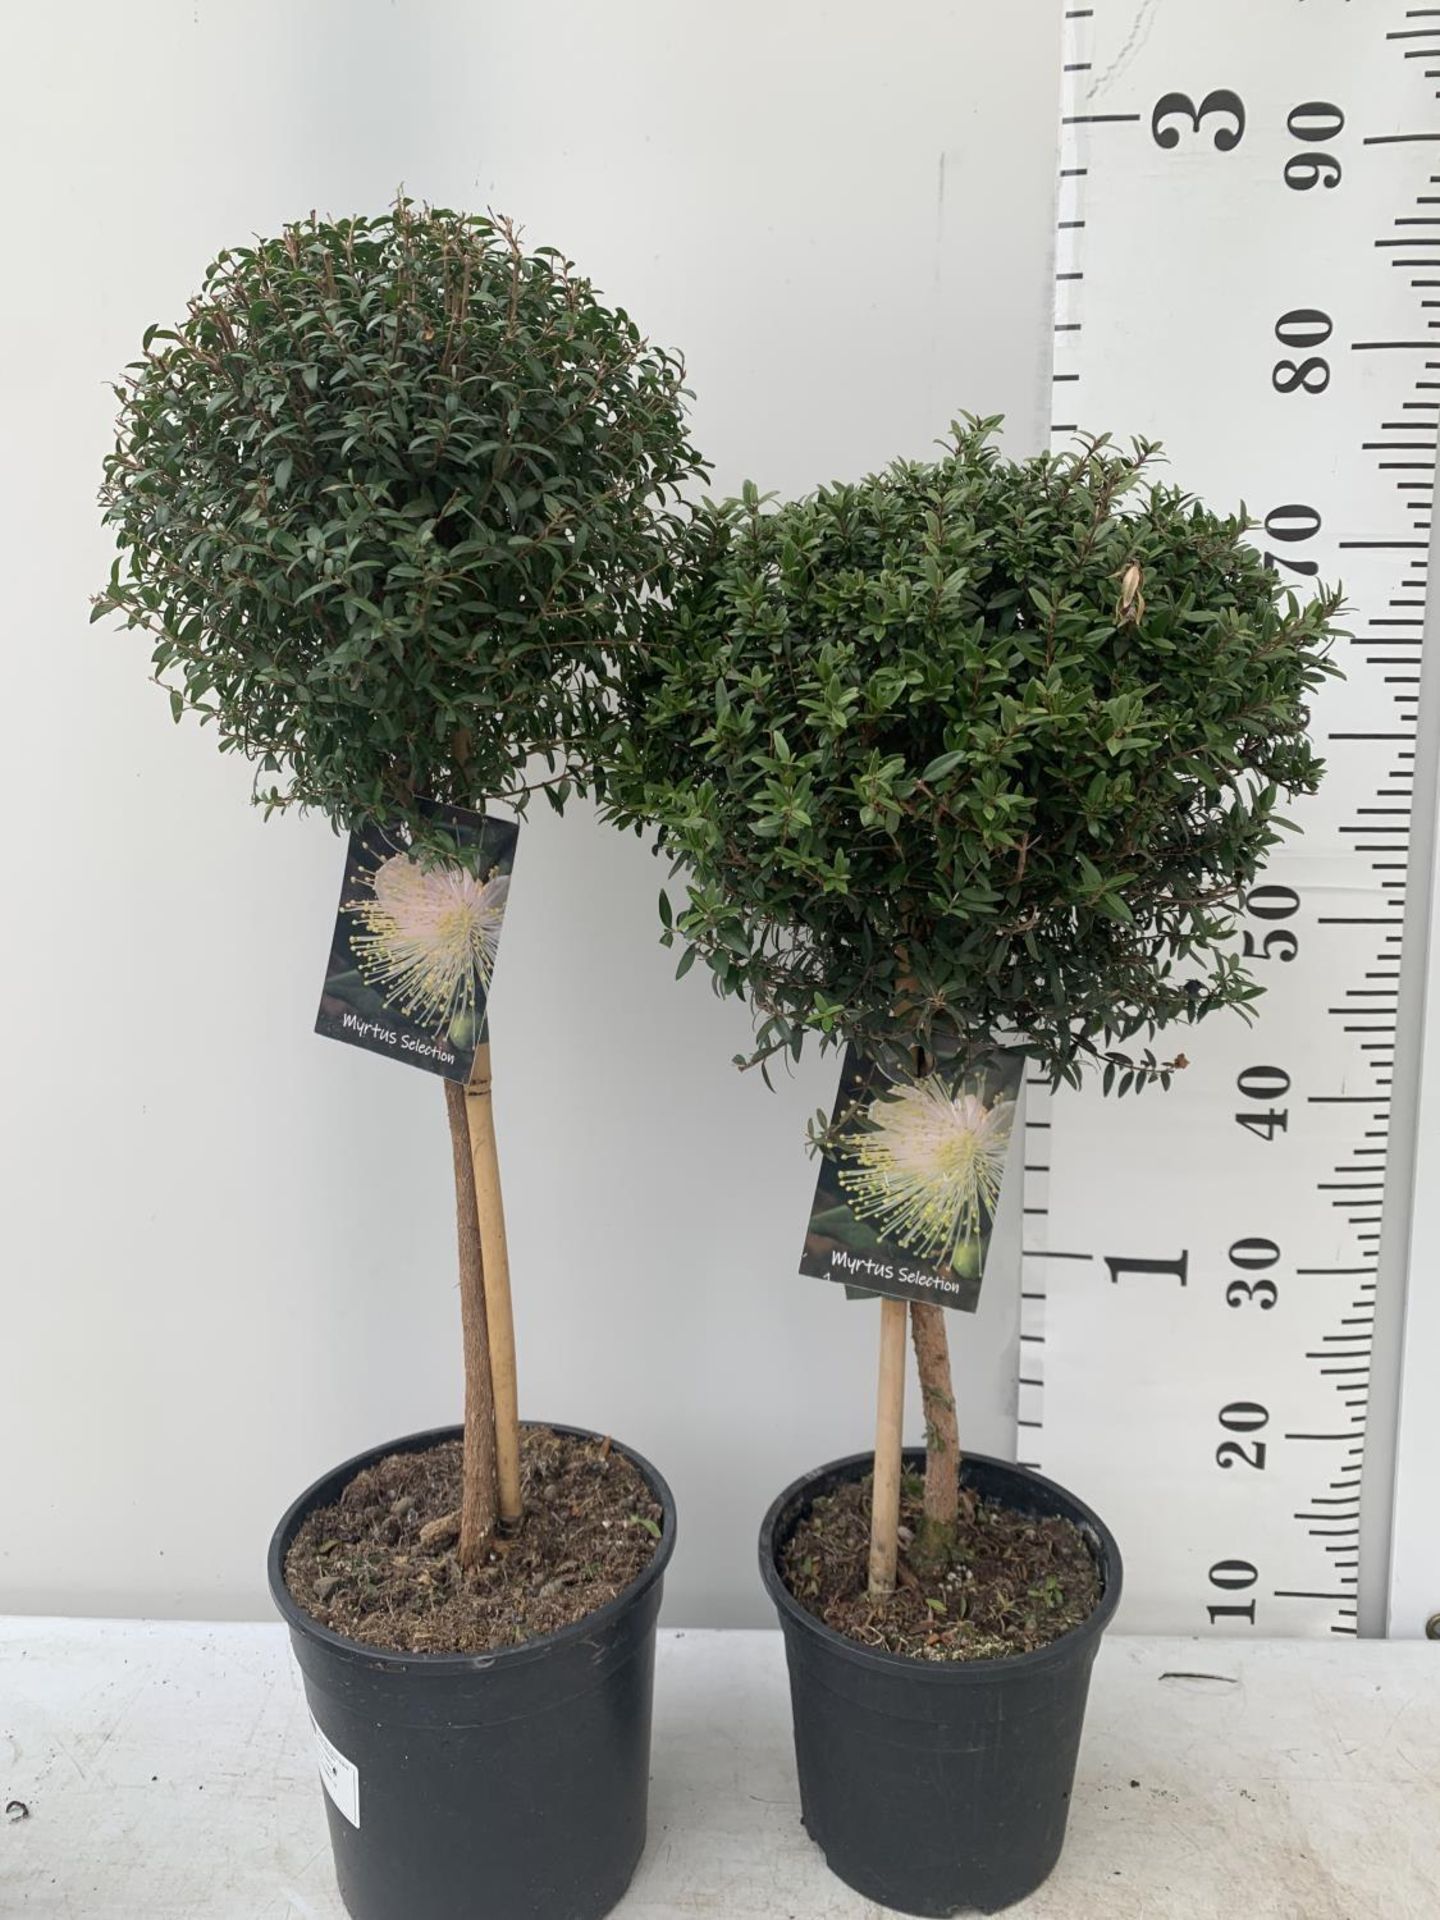 TWO MYRTUS SELECTION STANDARD TREES OF DIFFERING HEIGHTS ONE APPROX 85CM IN HEIGHT AND ONE 70CM IN 2 - Image 4 of 10